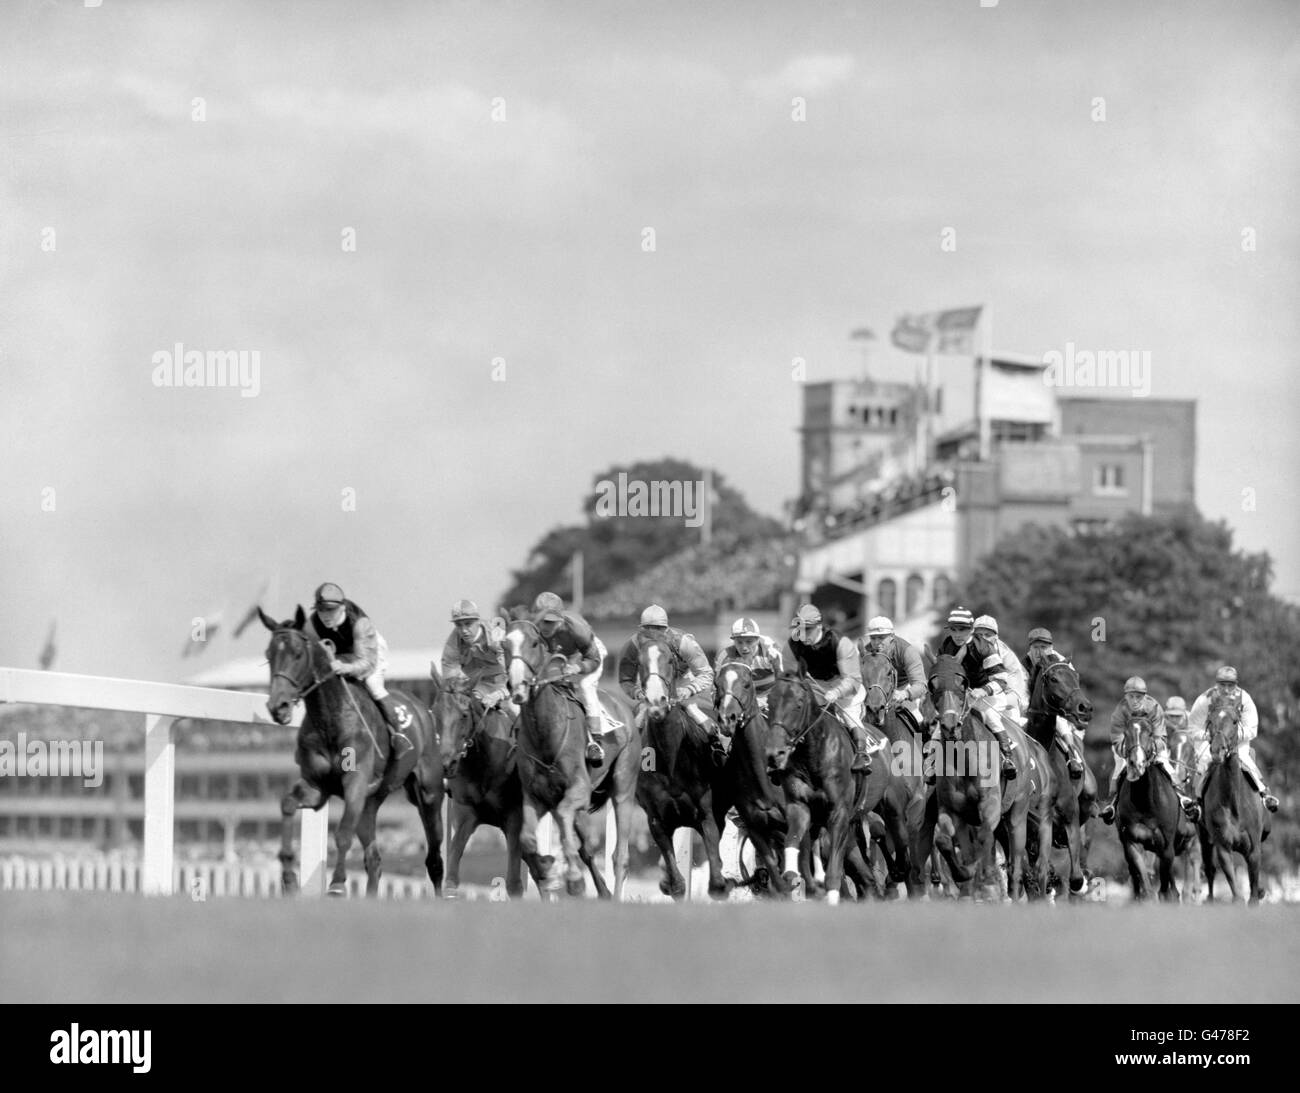 Horse Racing - Royal Ascot - Ascot Racecourse. A melee of speeding hooves round the bend as the field battle for the Ascot Stakes Stock Photo